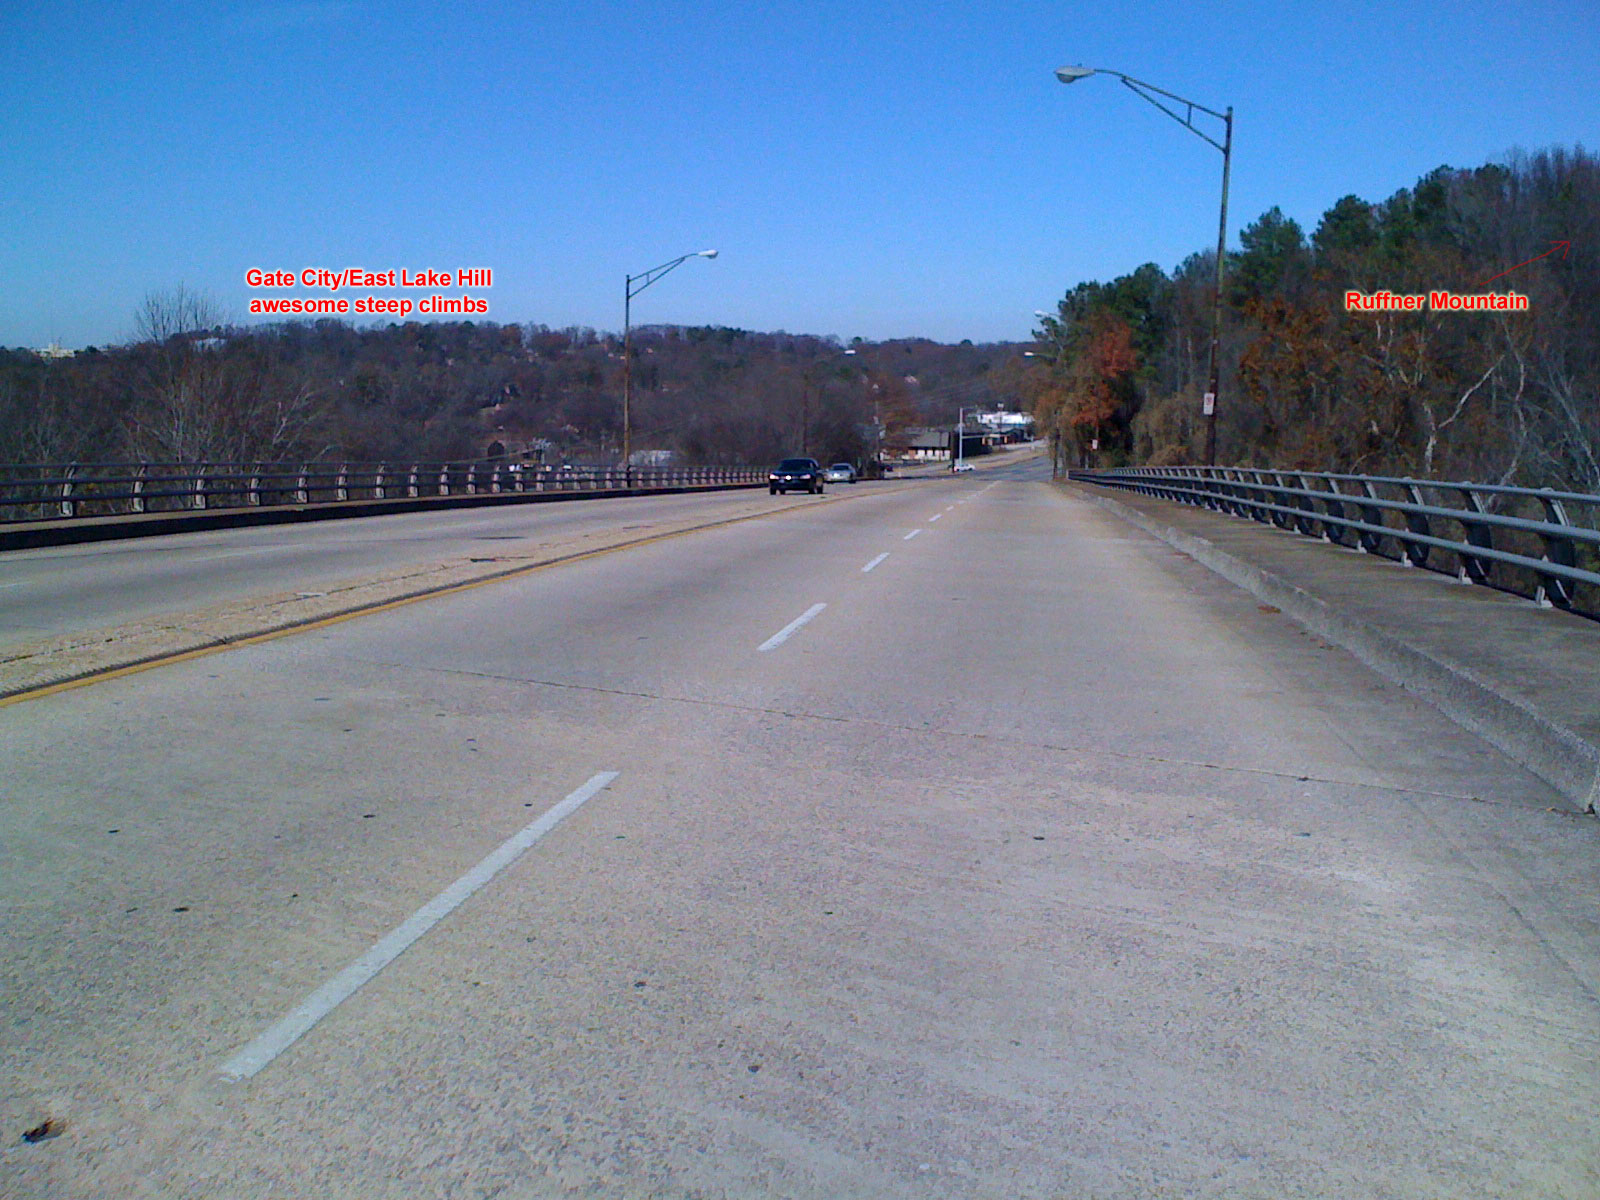 The view of the Gate City / East Lake hill which Oporto-Madrid Blvd skirts around on its way to Ruffner Mountain. The route I created took me straight up and over the hill on a nice 26% one lane road